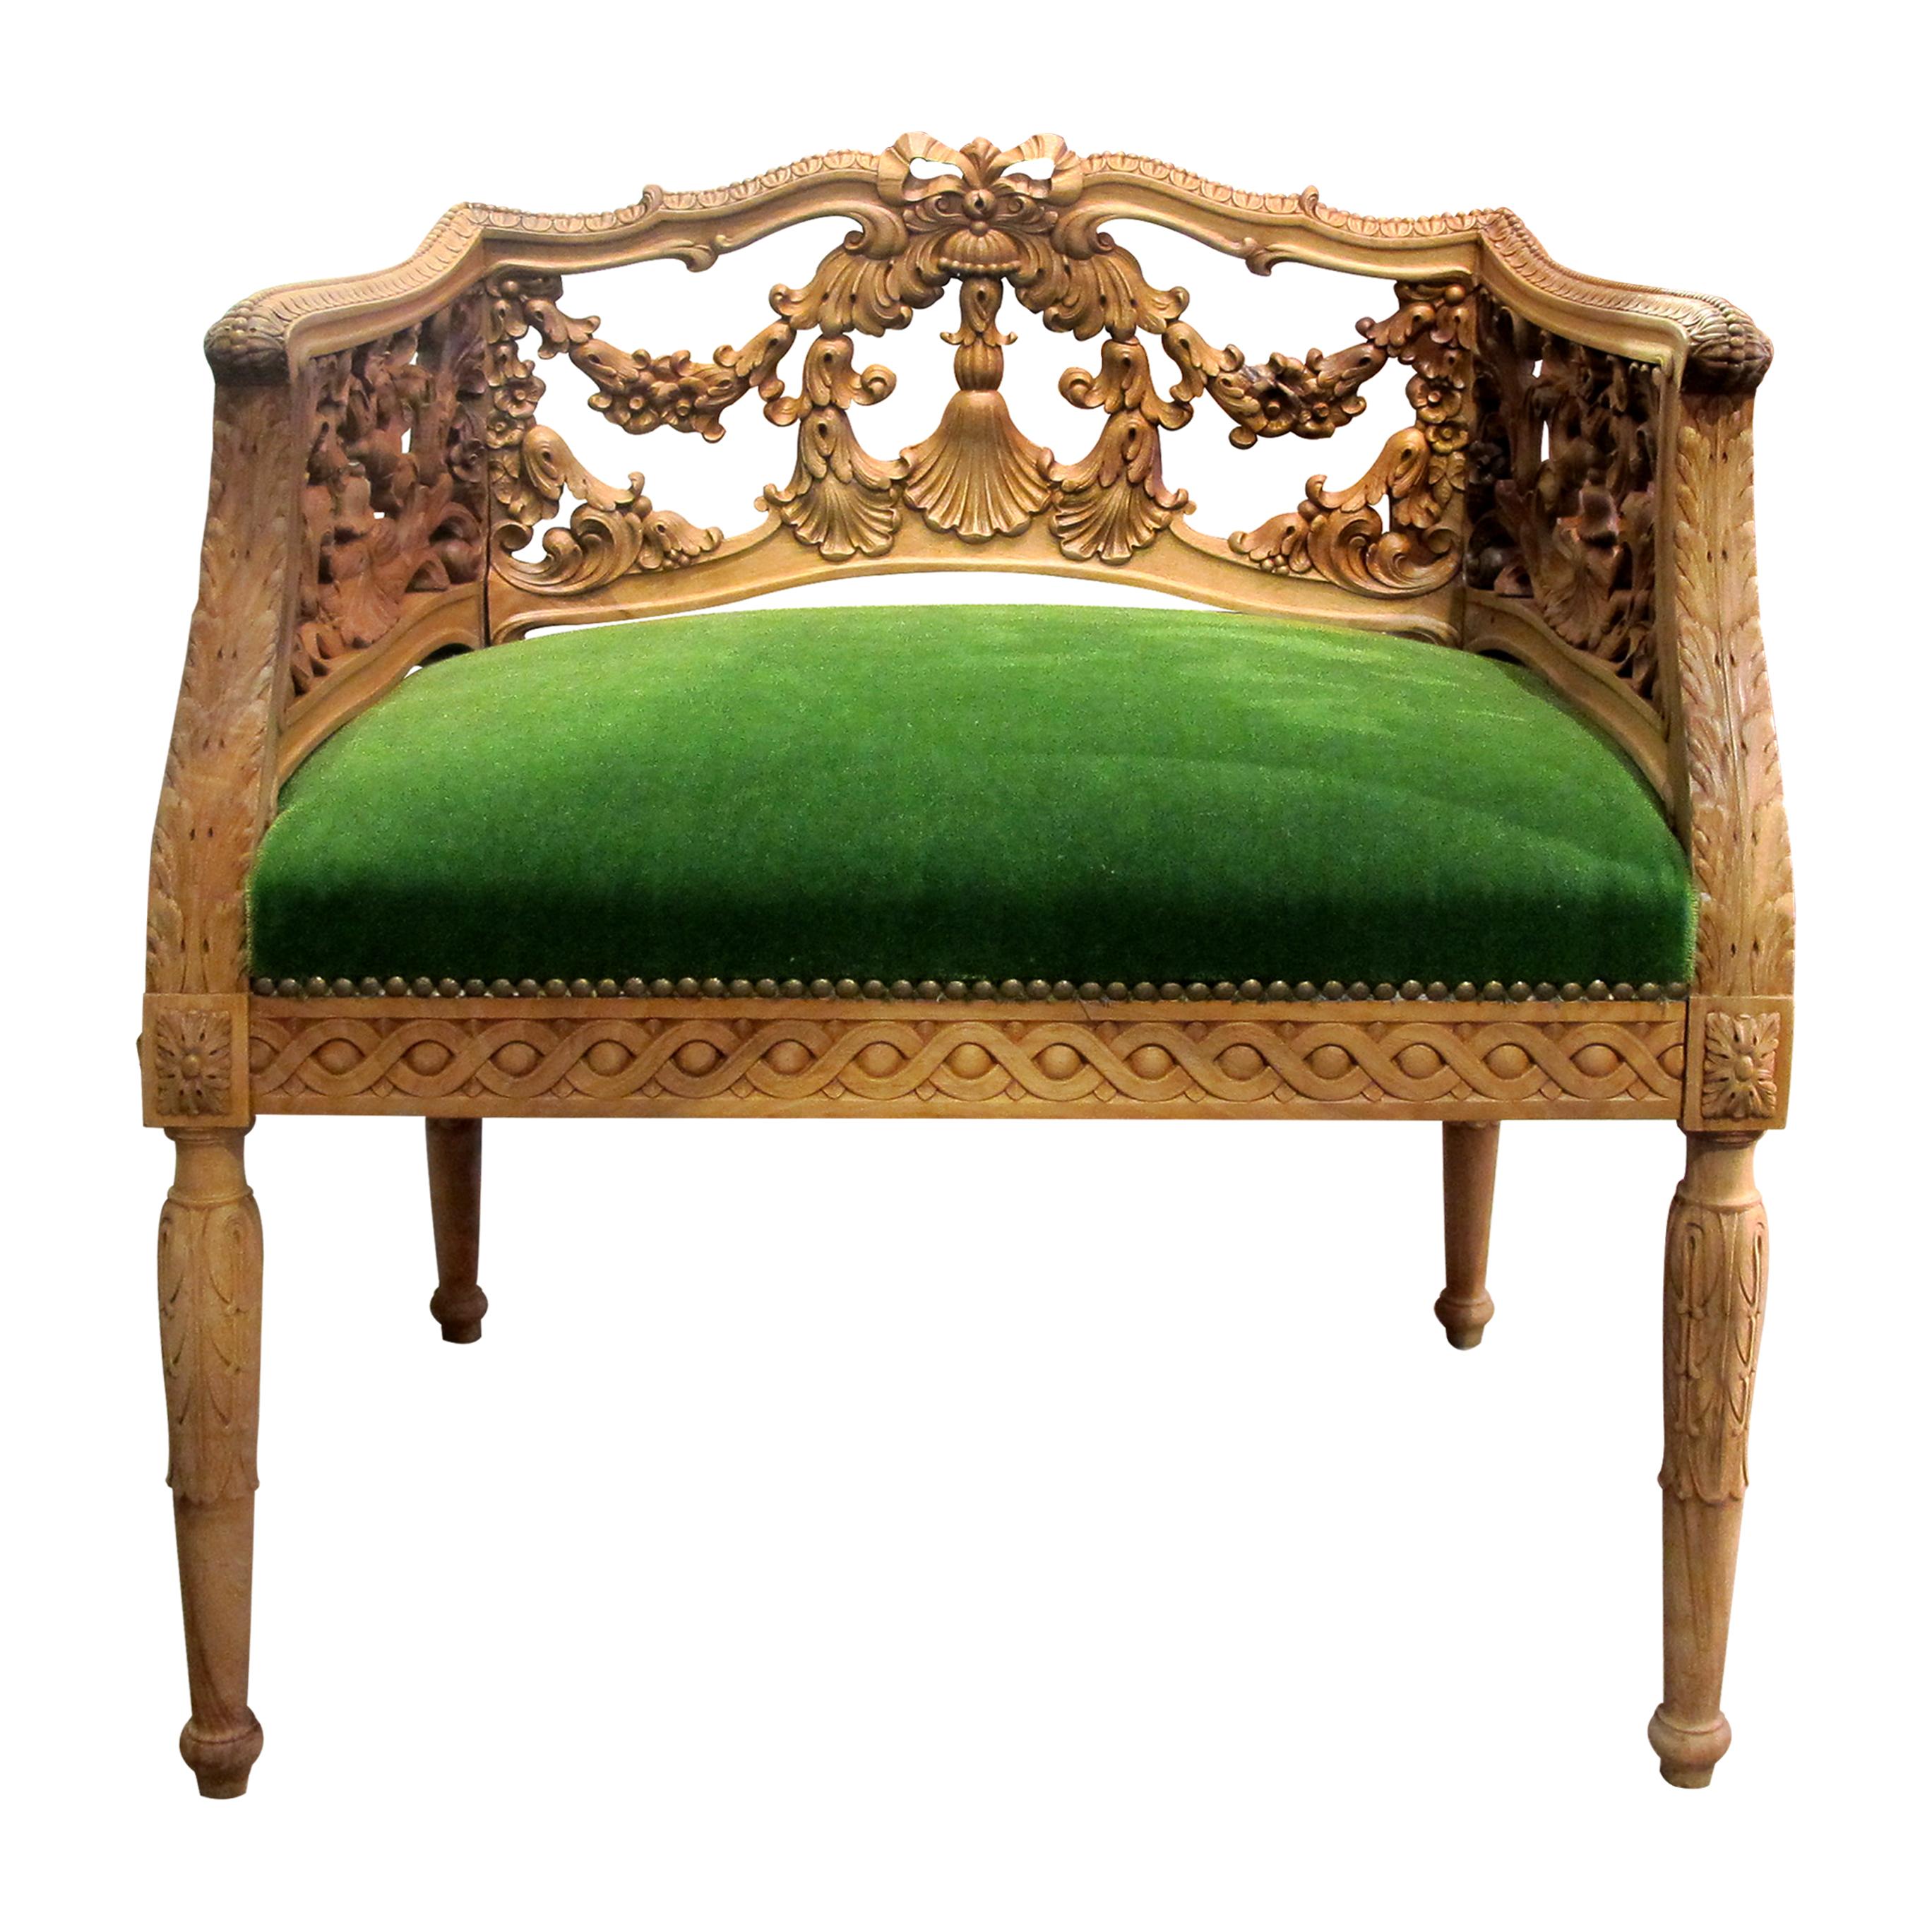 Pair of elegant and highly decorative armchairs, early 1900s Swedish. The arms and the backrest of the chairs have been beautifully carved with generous curves. The chairs are upholstered in a green mohair fabric from Lelievre UK. 

Size: H: 74 cm